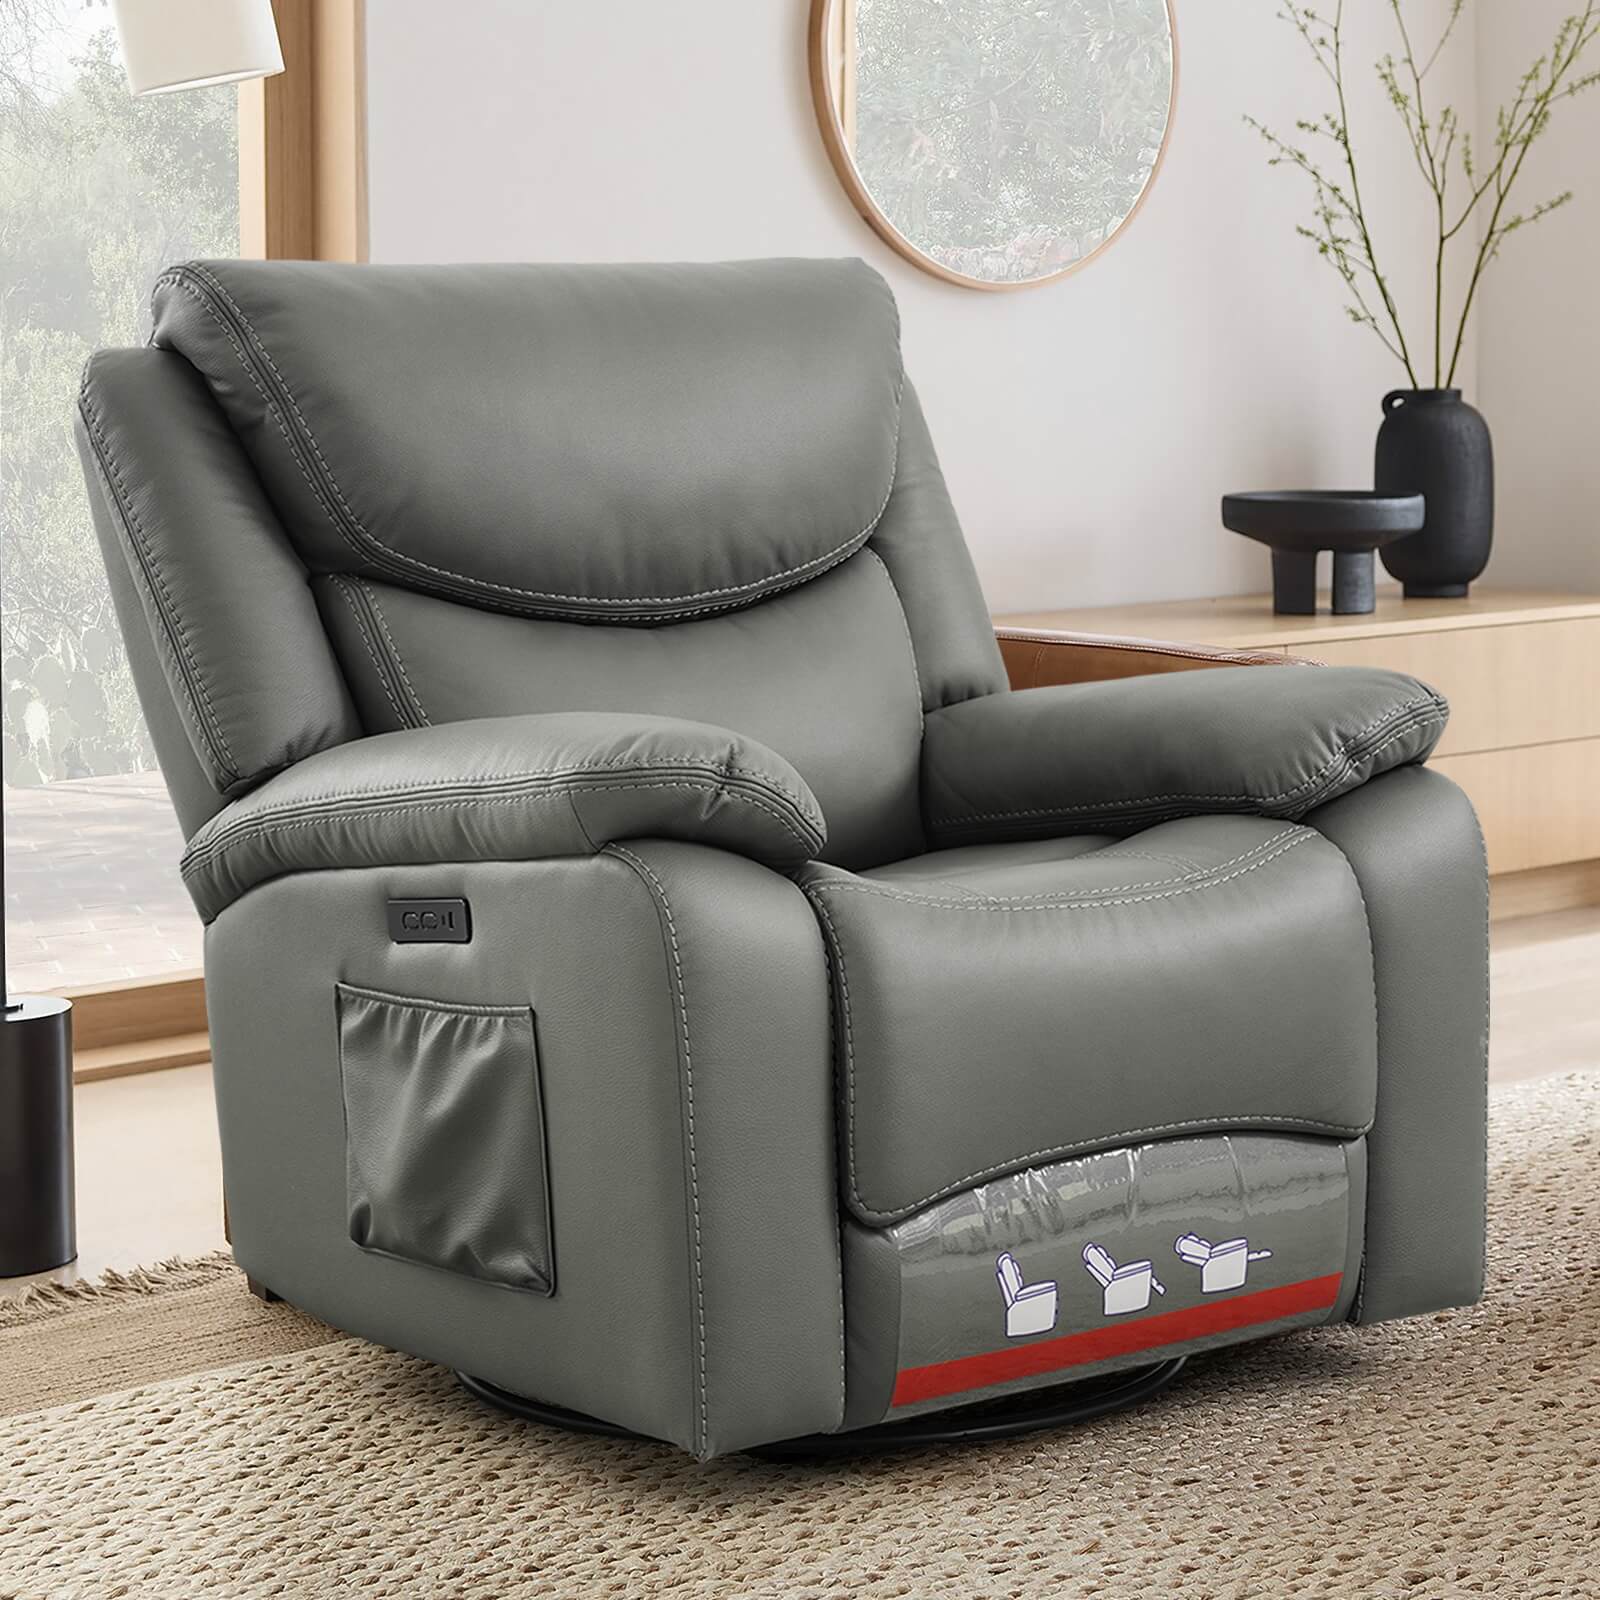 Soulout Swivel Glider Rocking Recliner Power Reclining Chair